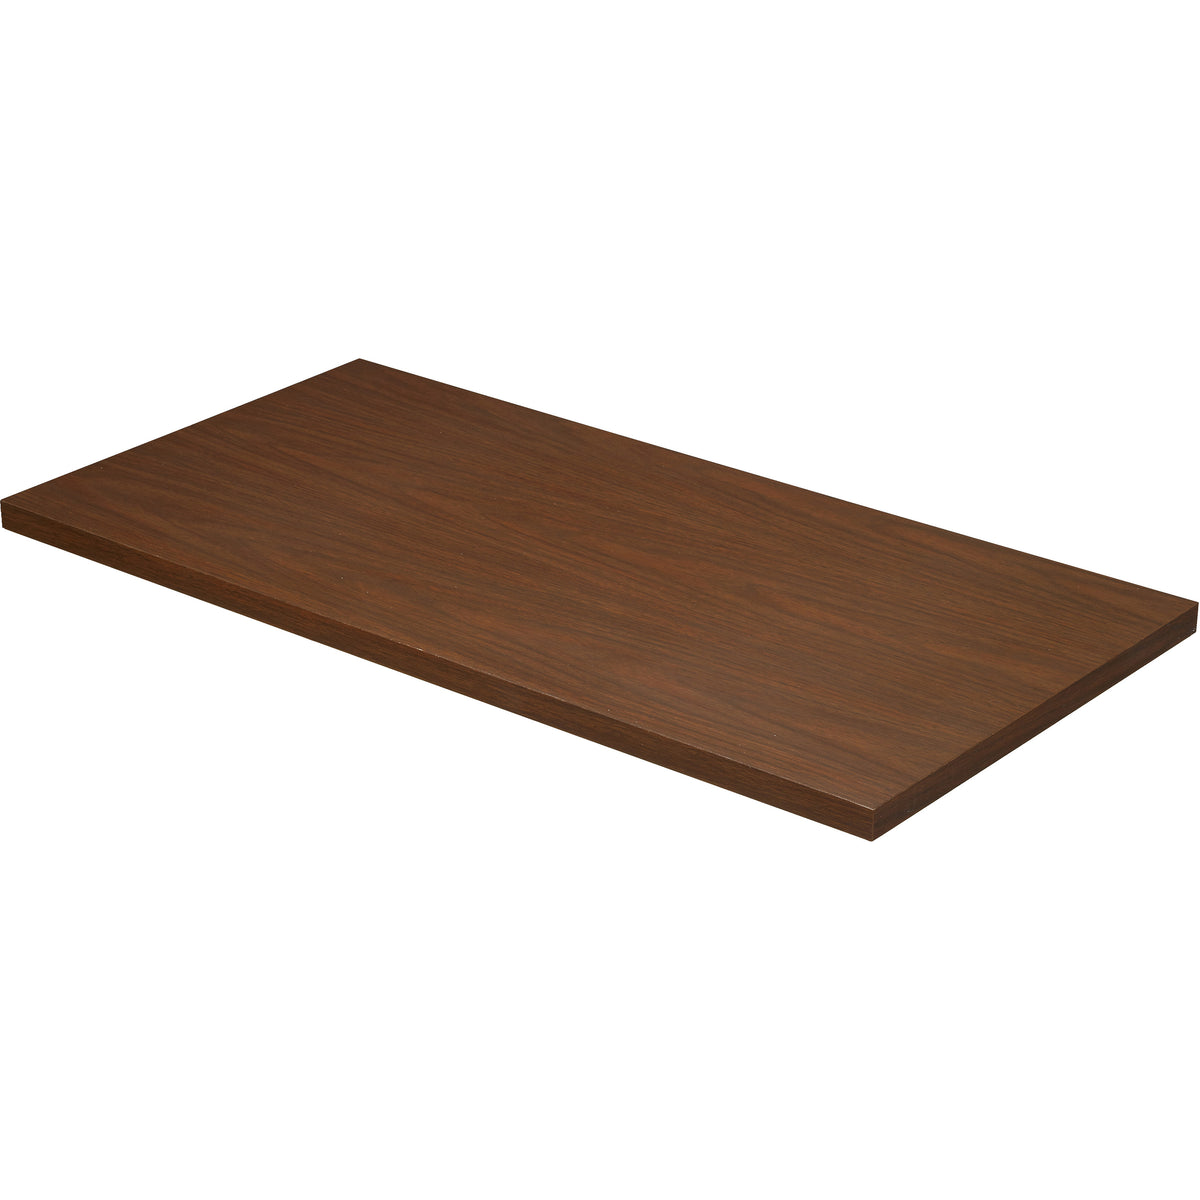 Tennsco 42" Wide Laminate Top for Lateral File - Mahogany, T1842-L005